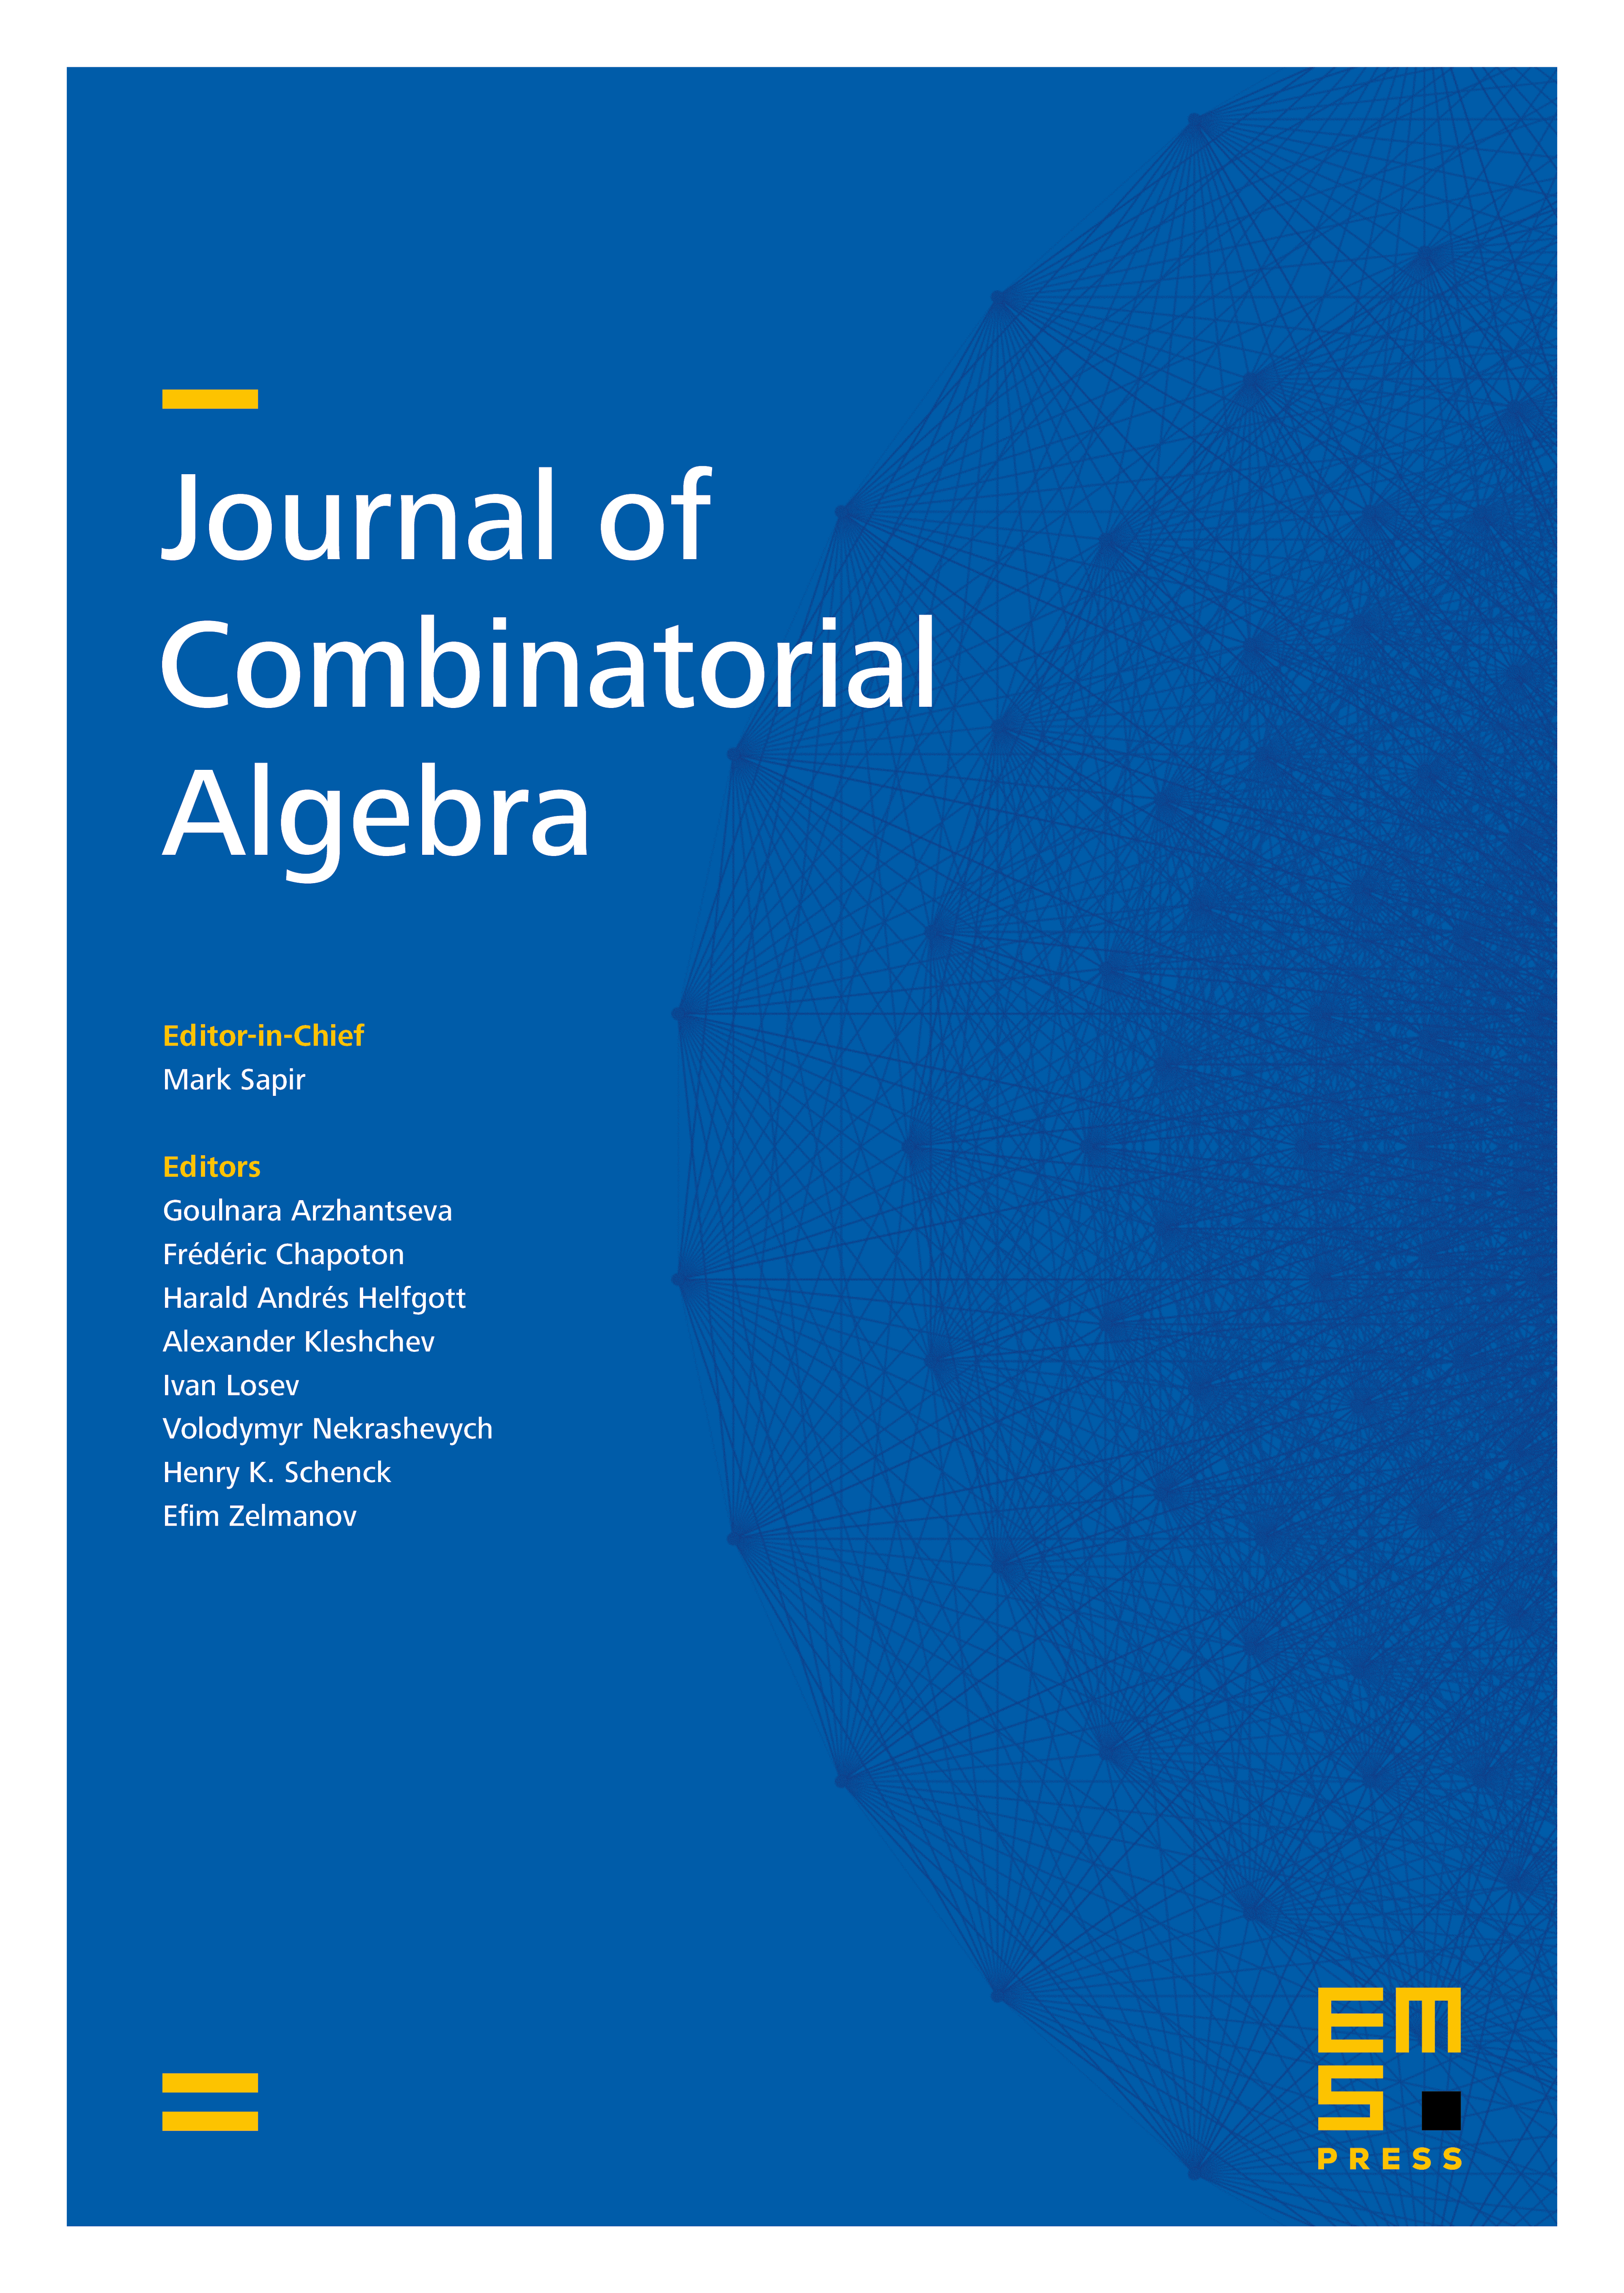 The partial Temperley–Lieb algebra and its representations cover